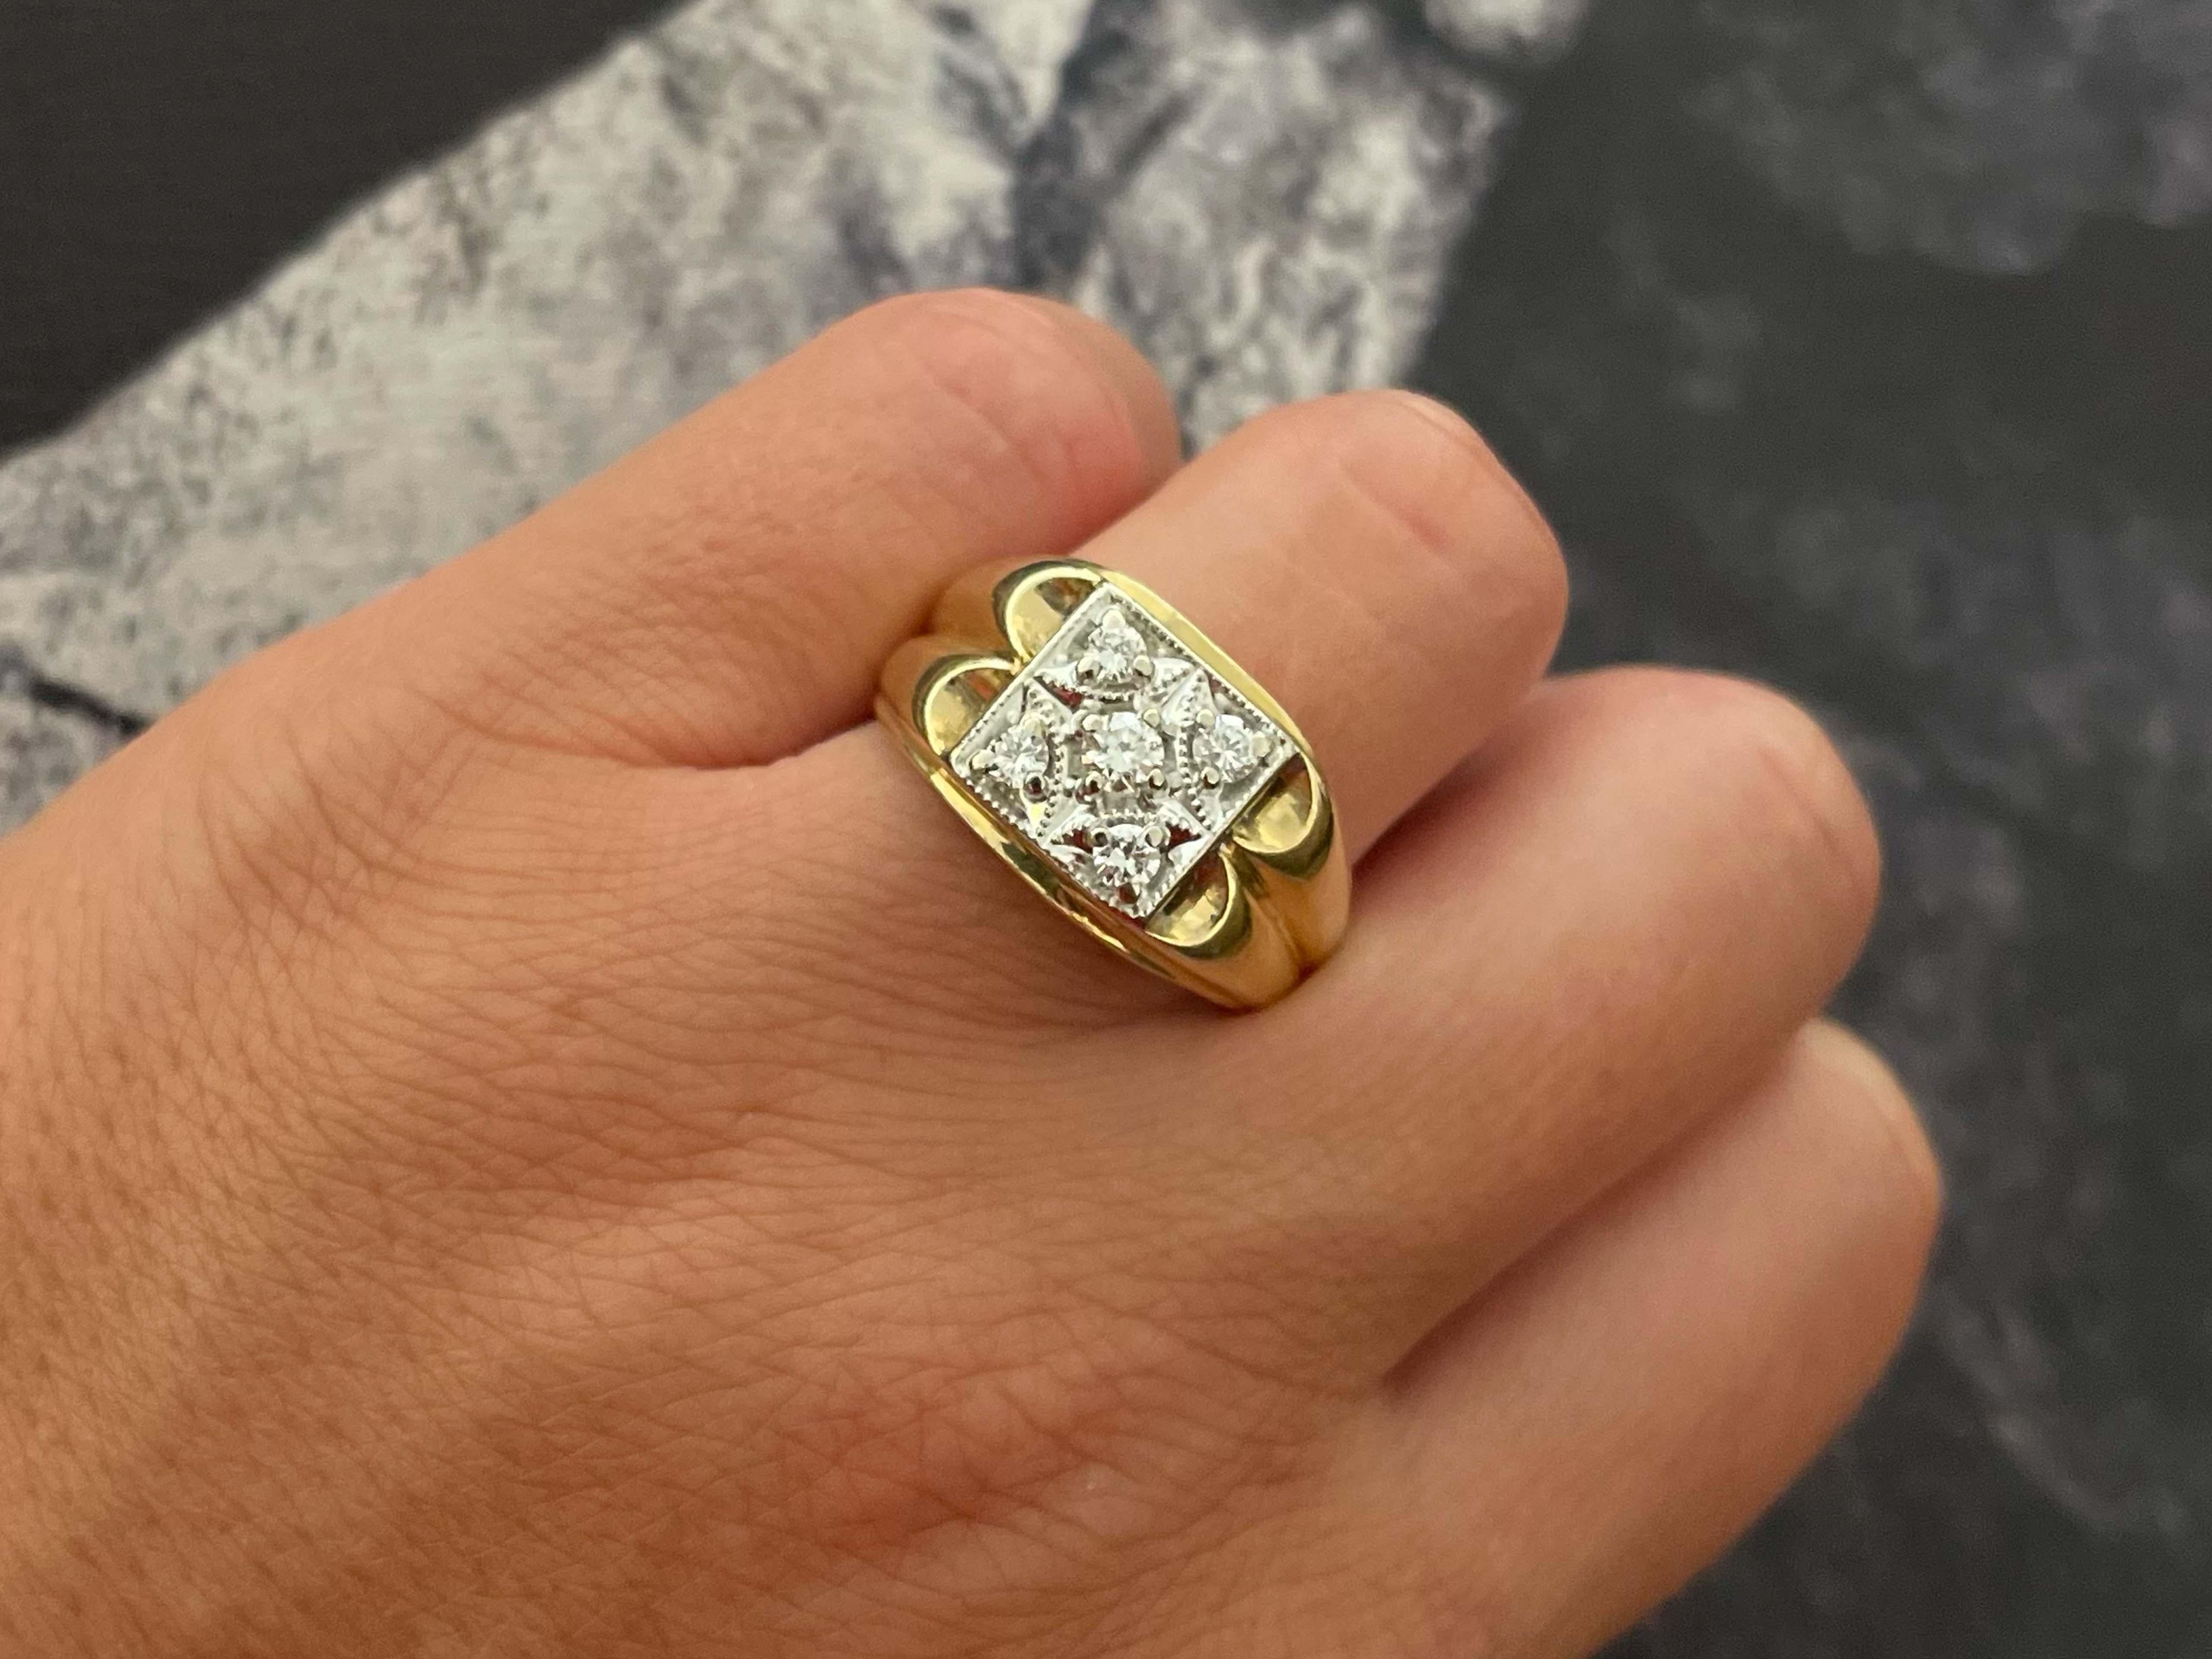 Item Specifications:

Metal: 14k Yellow and White Gold

Style: Statement Ring

Ring Size: 9.5 (resizing available for a fee)

Total Weight: 8.1 Grams

Gemstone Specifications: 5 Diamonds

Diamond Carat Weight: 0.42 carats

Diamond Color: G

Diamond